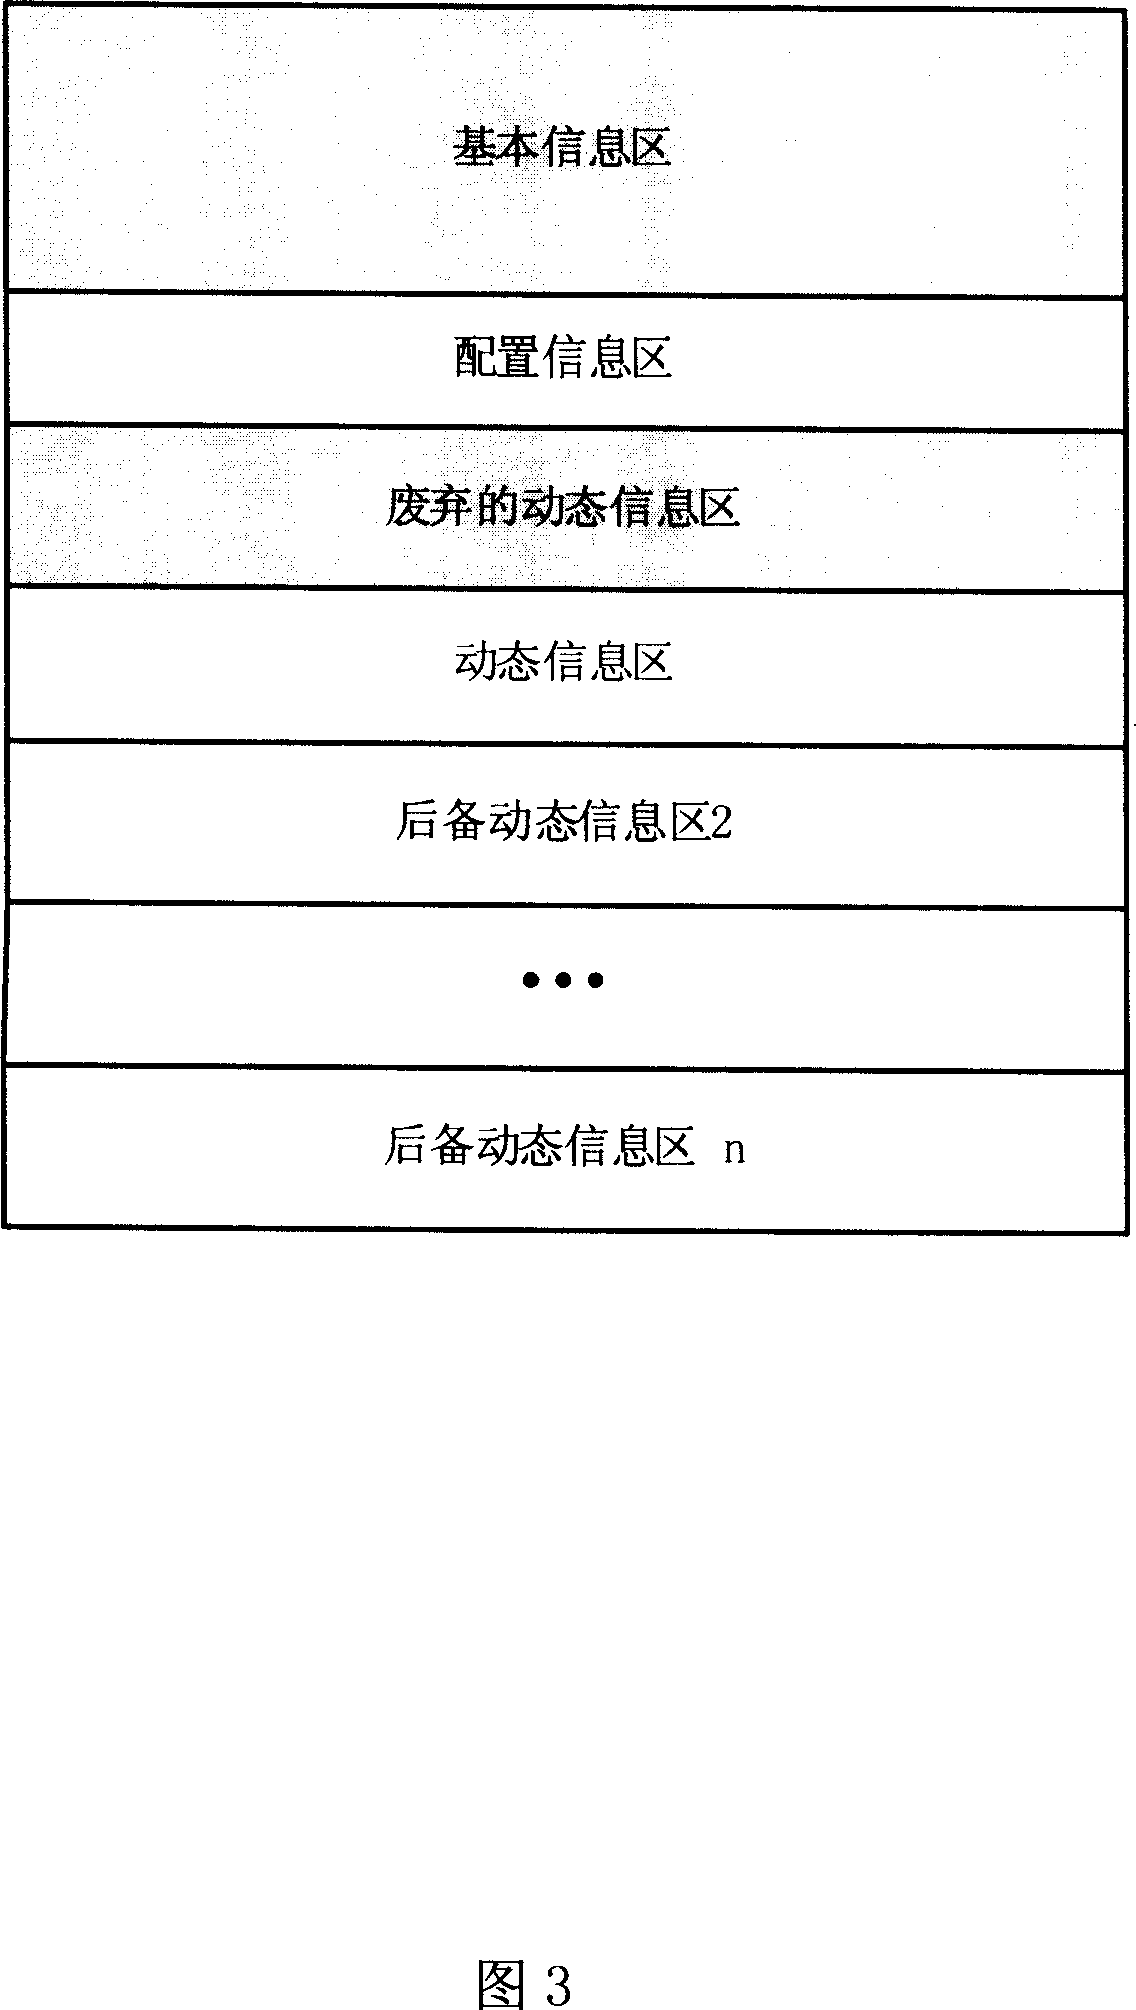 Method for reading and writing non-contact intelligent card data